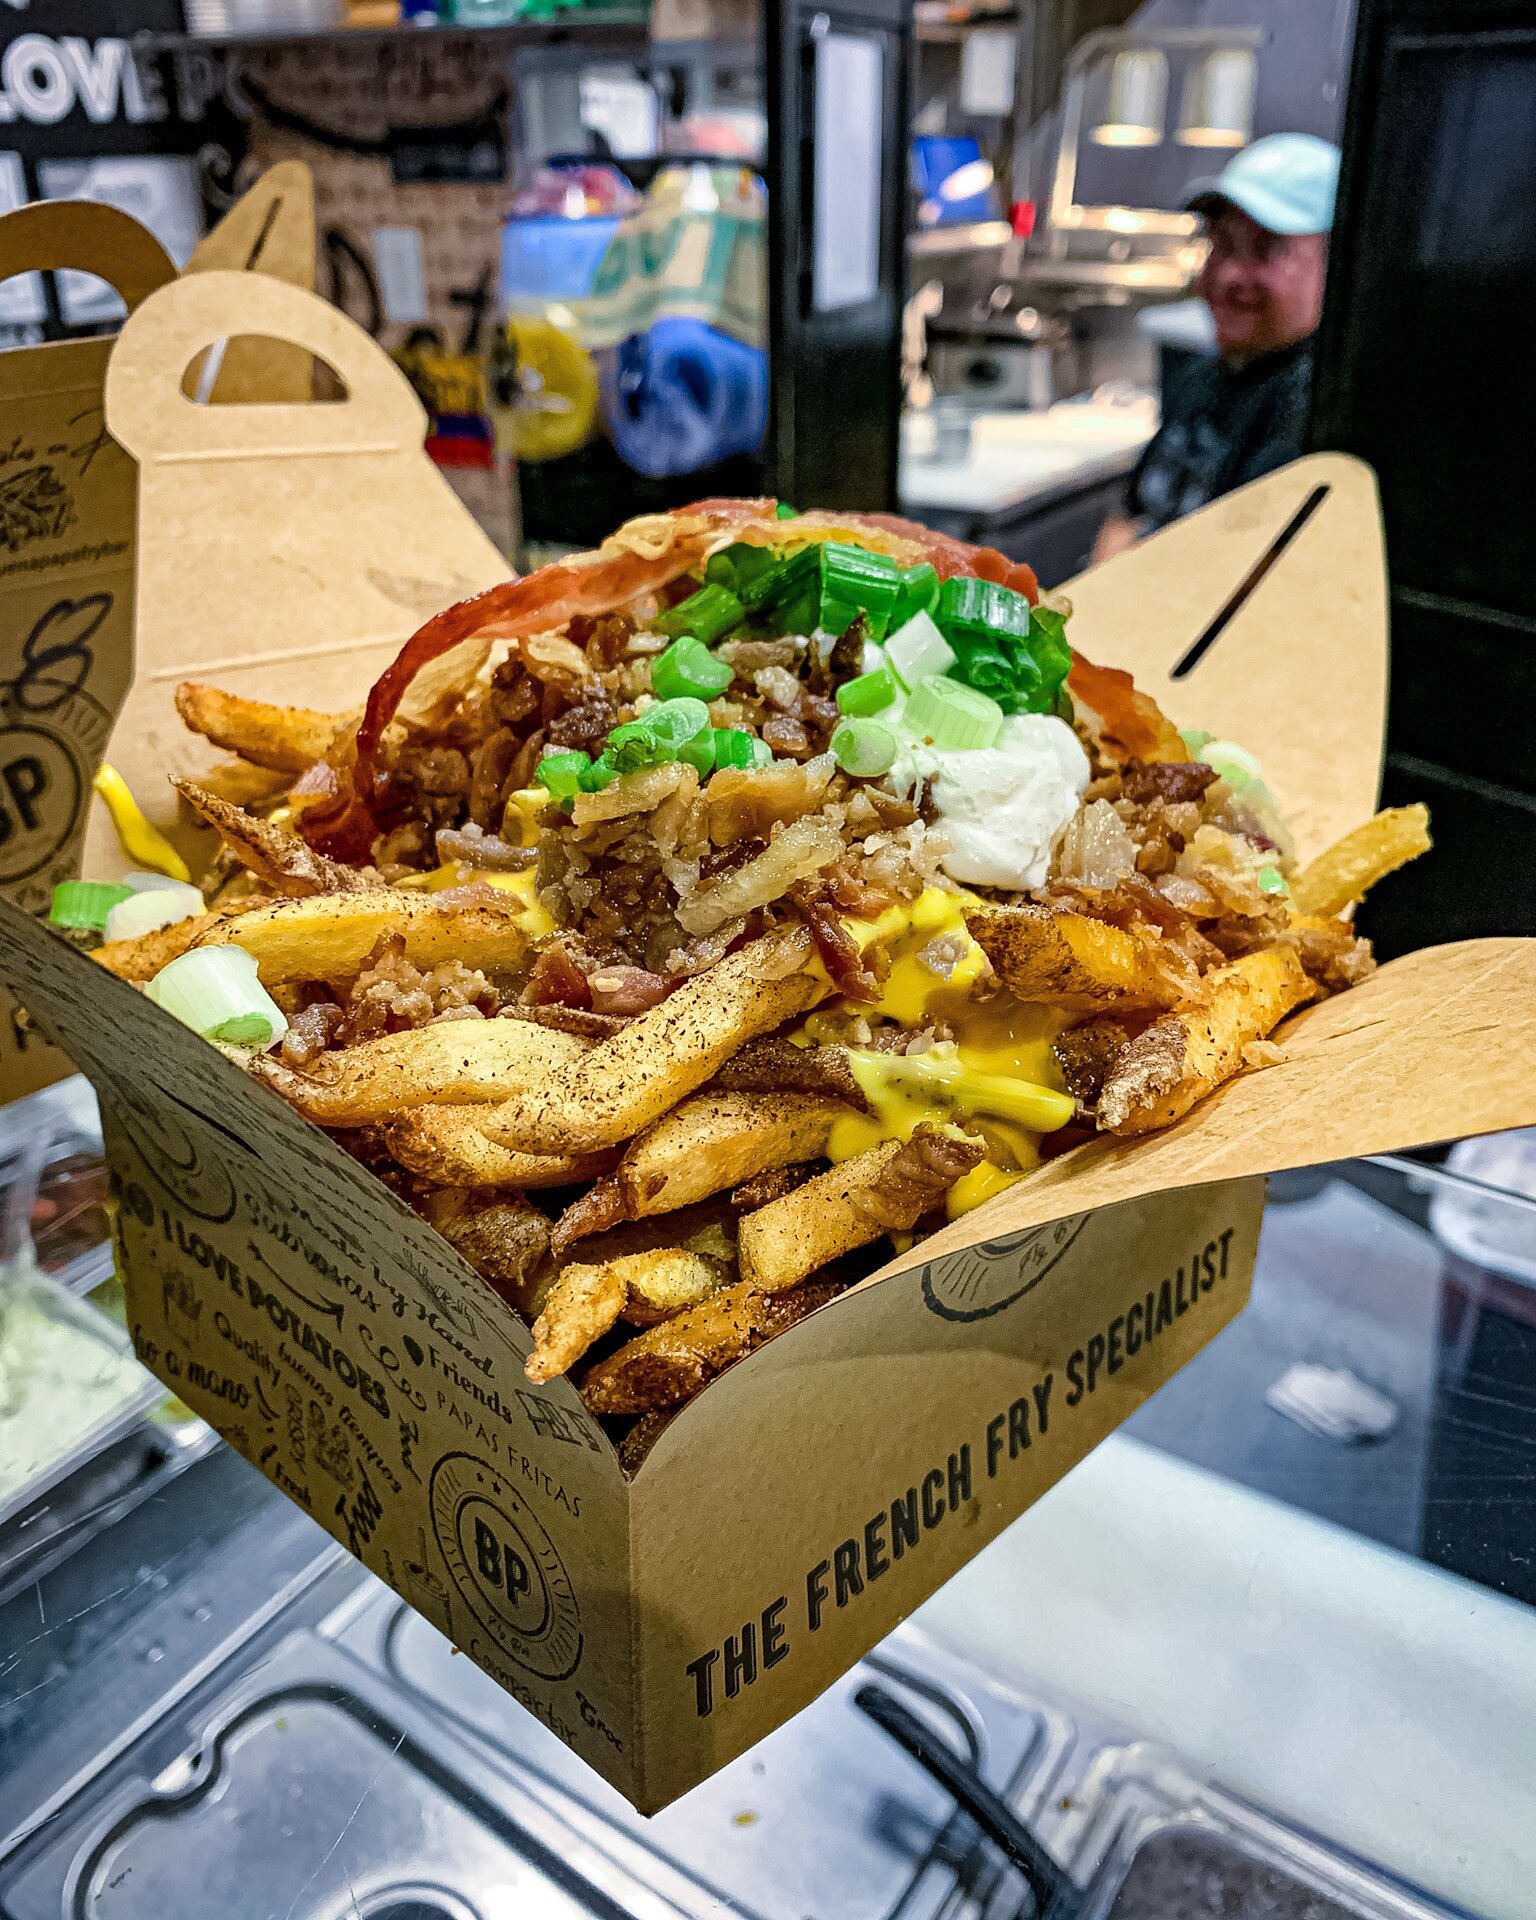 Want to add some excitement to your day? Our loaded fries are the perfect adventure! 🍟🧭 Come on down and explore all the delicious toppings we have to offer.
&bull;&bull;&bull;&bull;&bull;&bull;&bull;&bull;&bull;&bull;&bull;&bull;&bull;&bull;&bull;